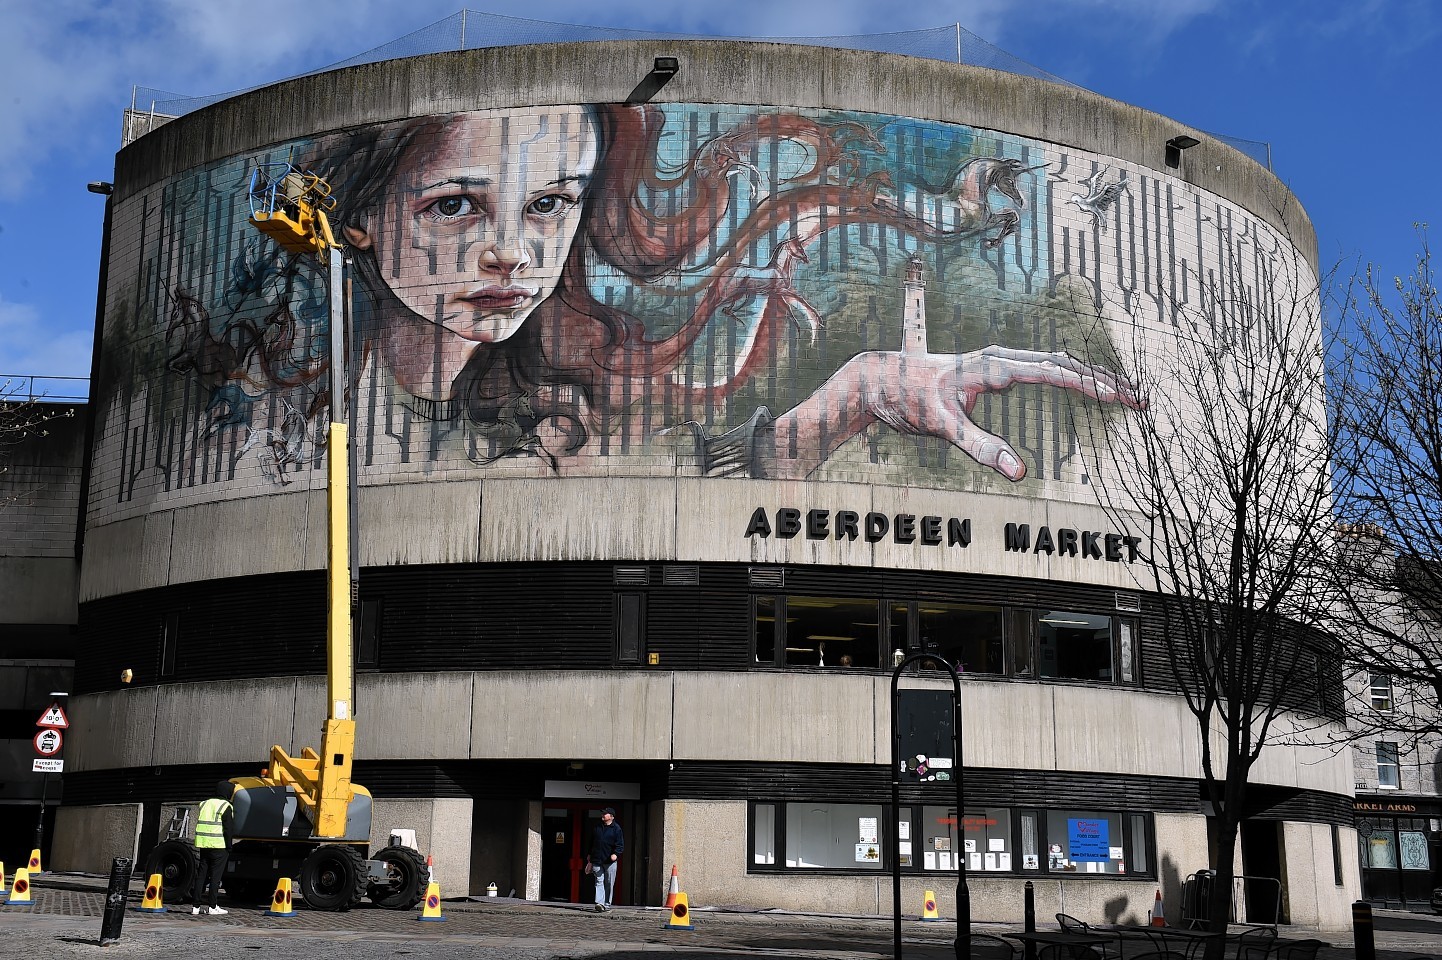 A stunning mural, painted on the outside of the Aberdeen Market